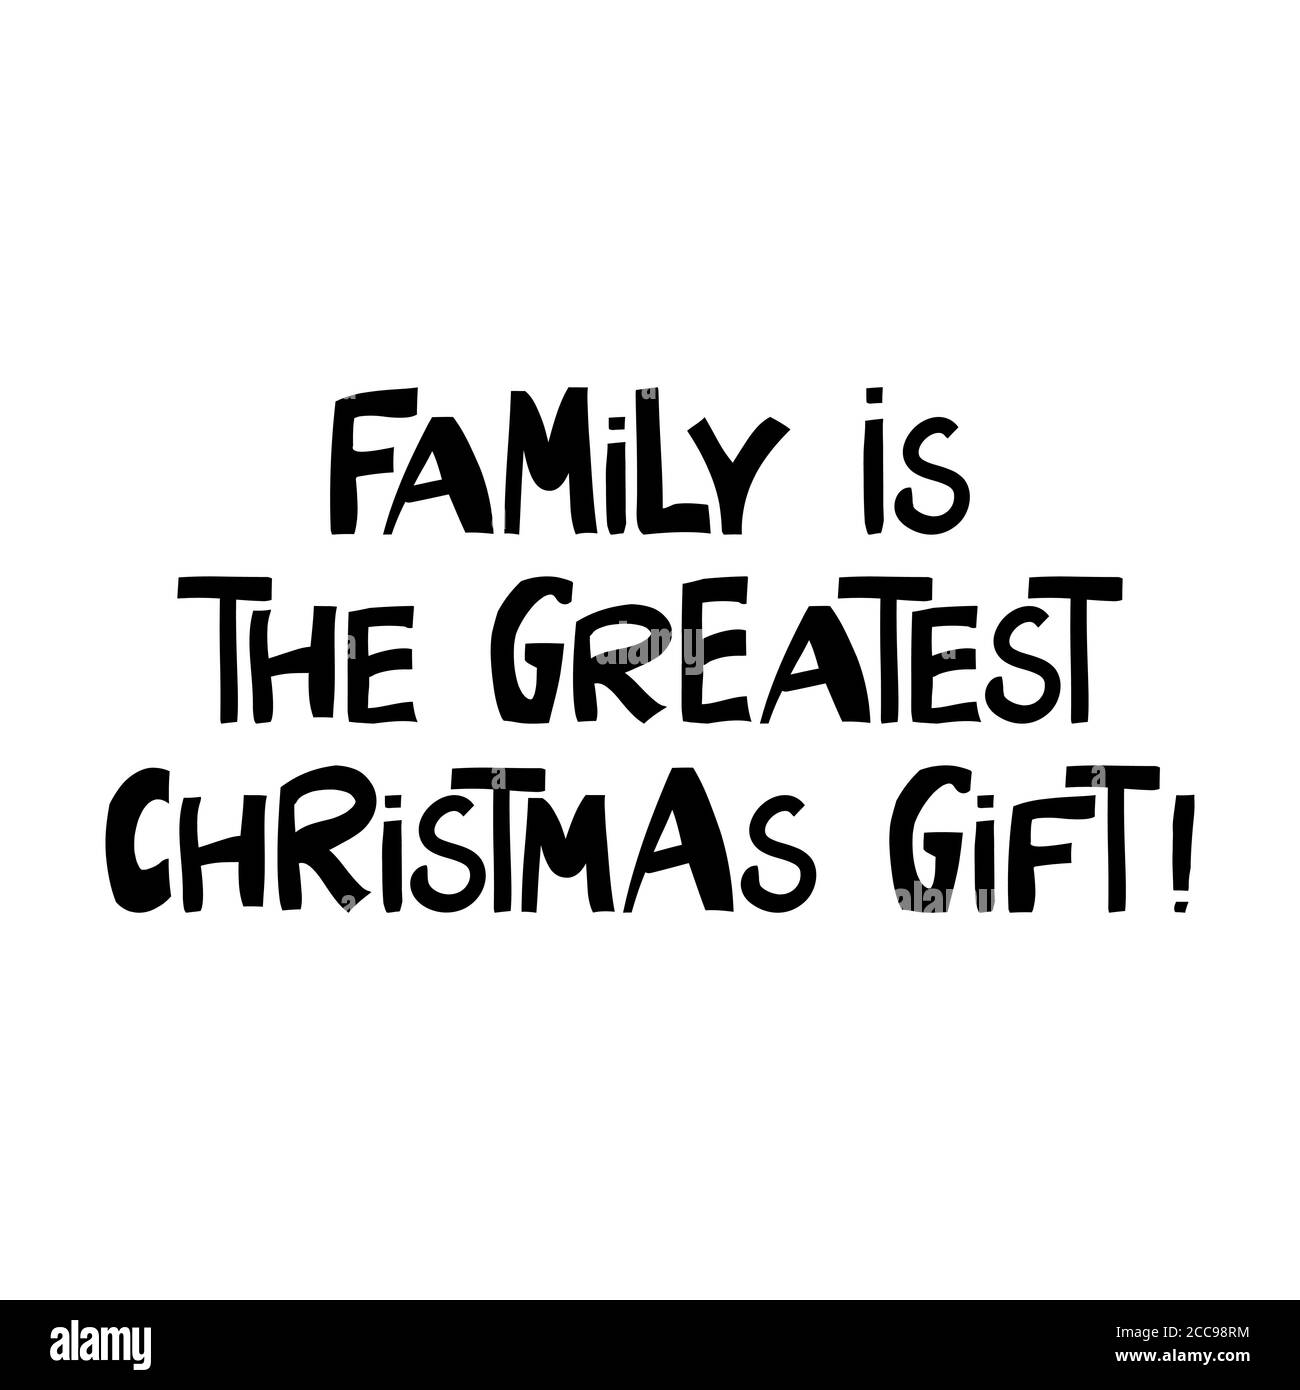 Family is the greatest Christmas gift. Winter holidays quote. Cute hand drawn lettering in modern scandinavian style. Isolated on white background Stock Vector